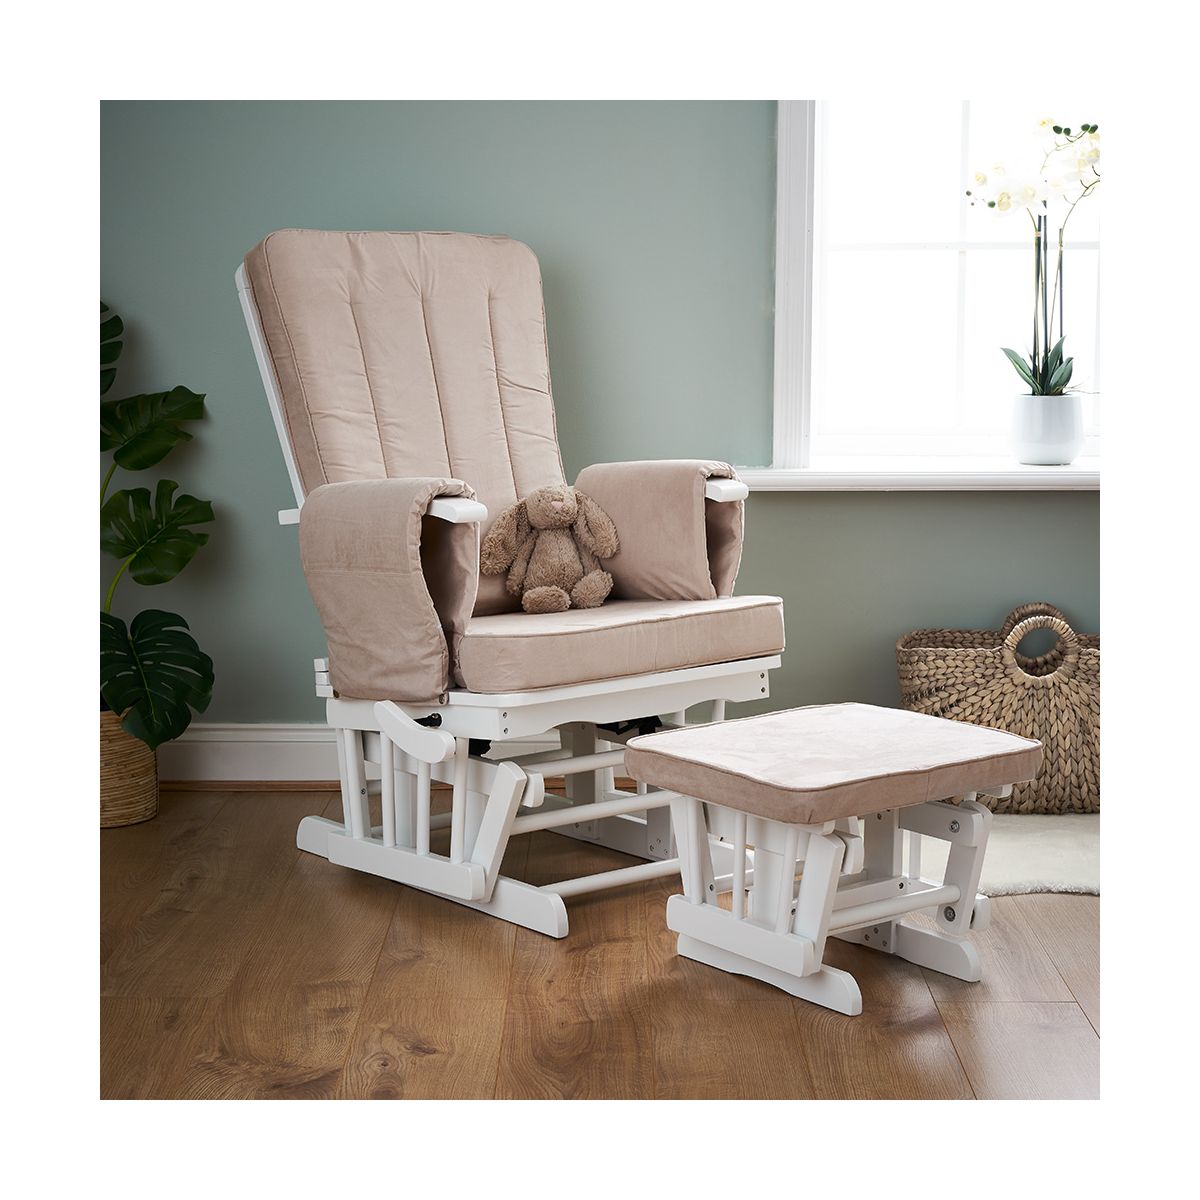 https://www.kiddies-kingdom.com/209861-thickbox_default/obaby-deluxe-reclining-gilder-chair-and-stool-white-with-sand-cushions-2022.jpg